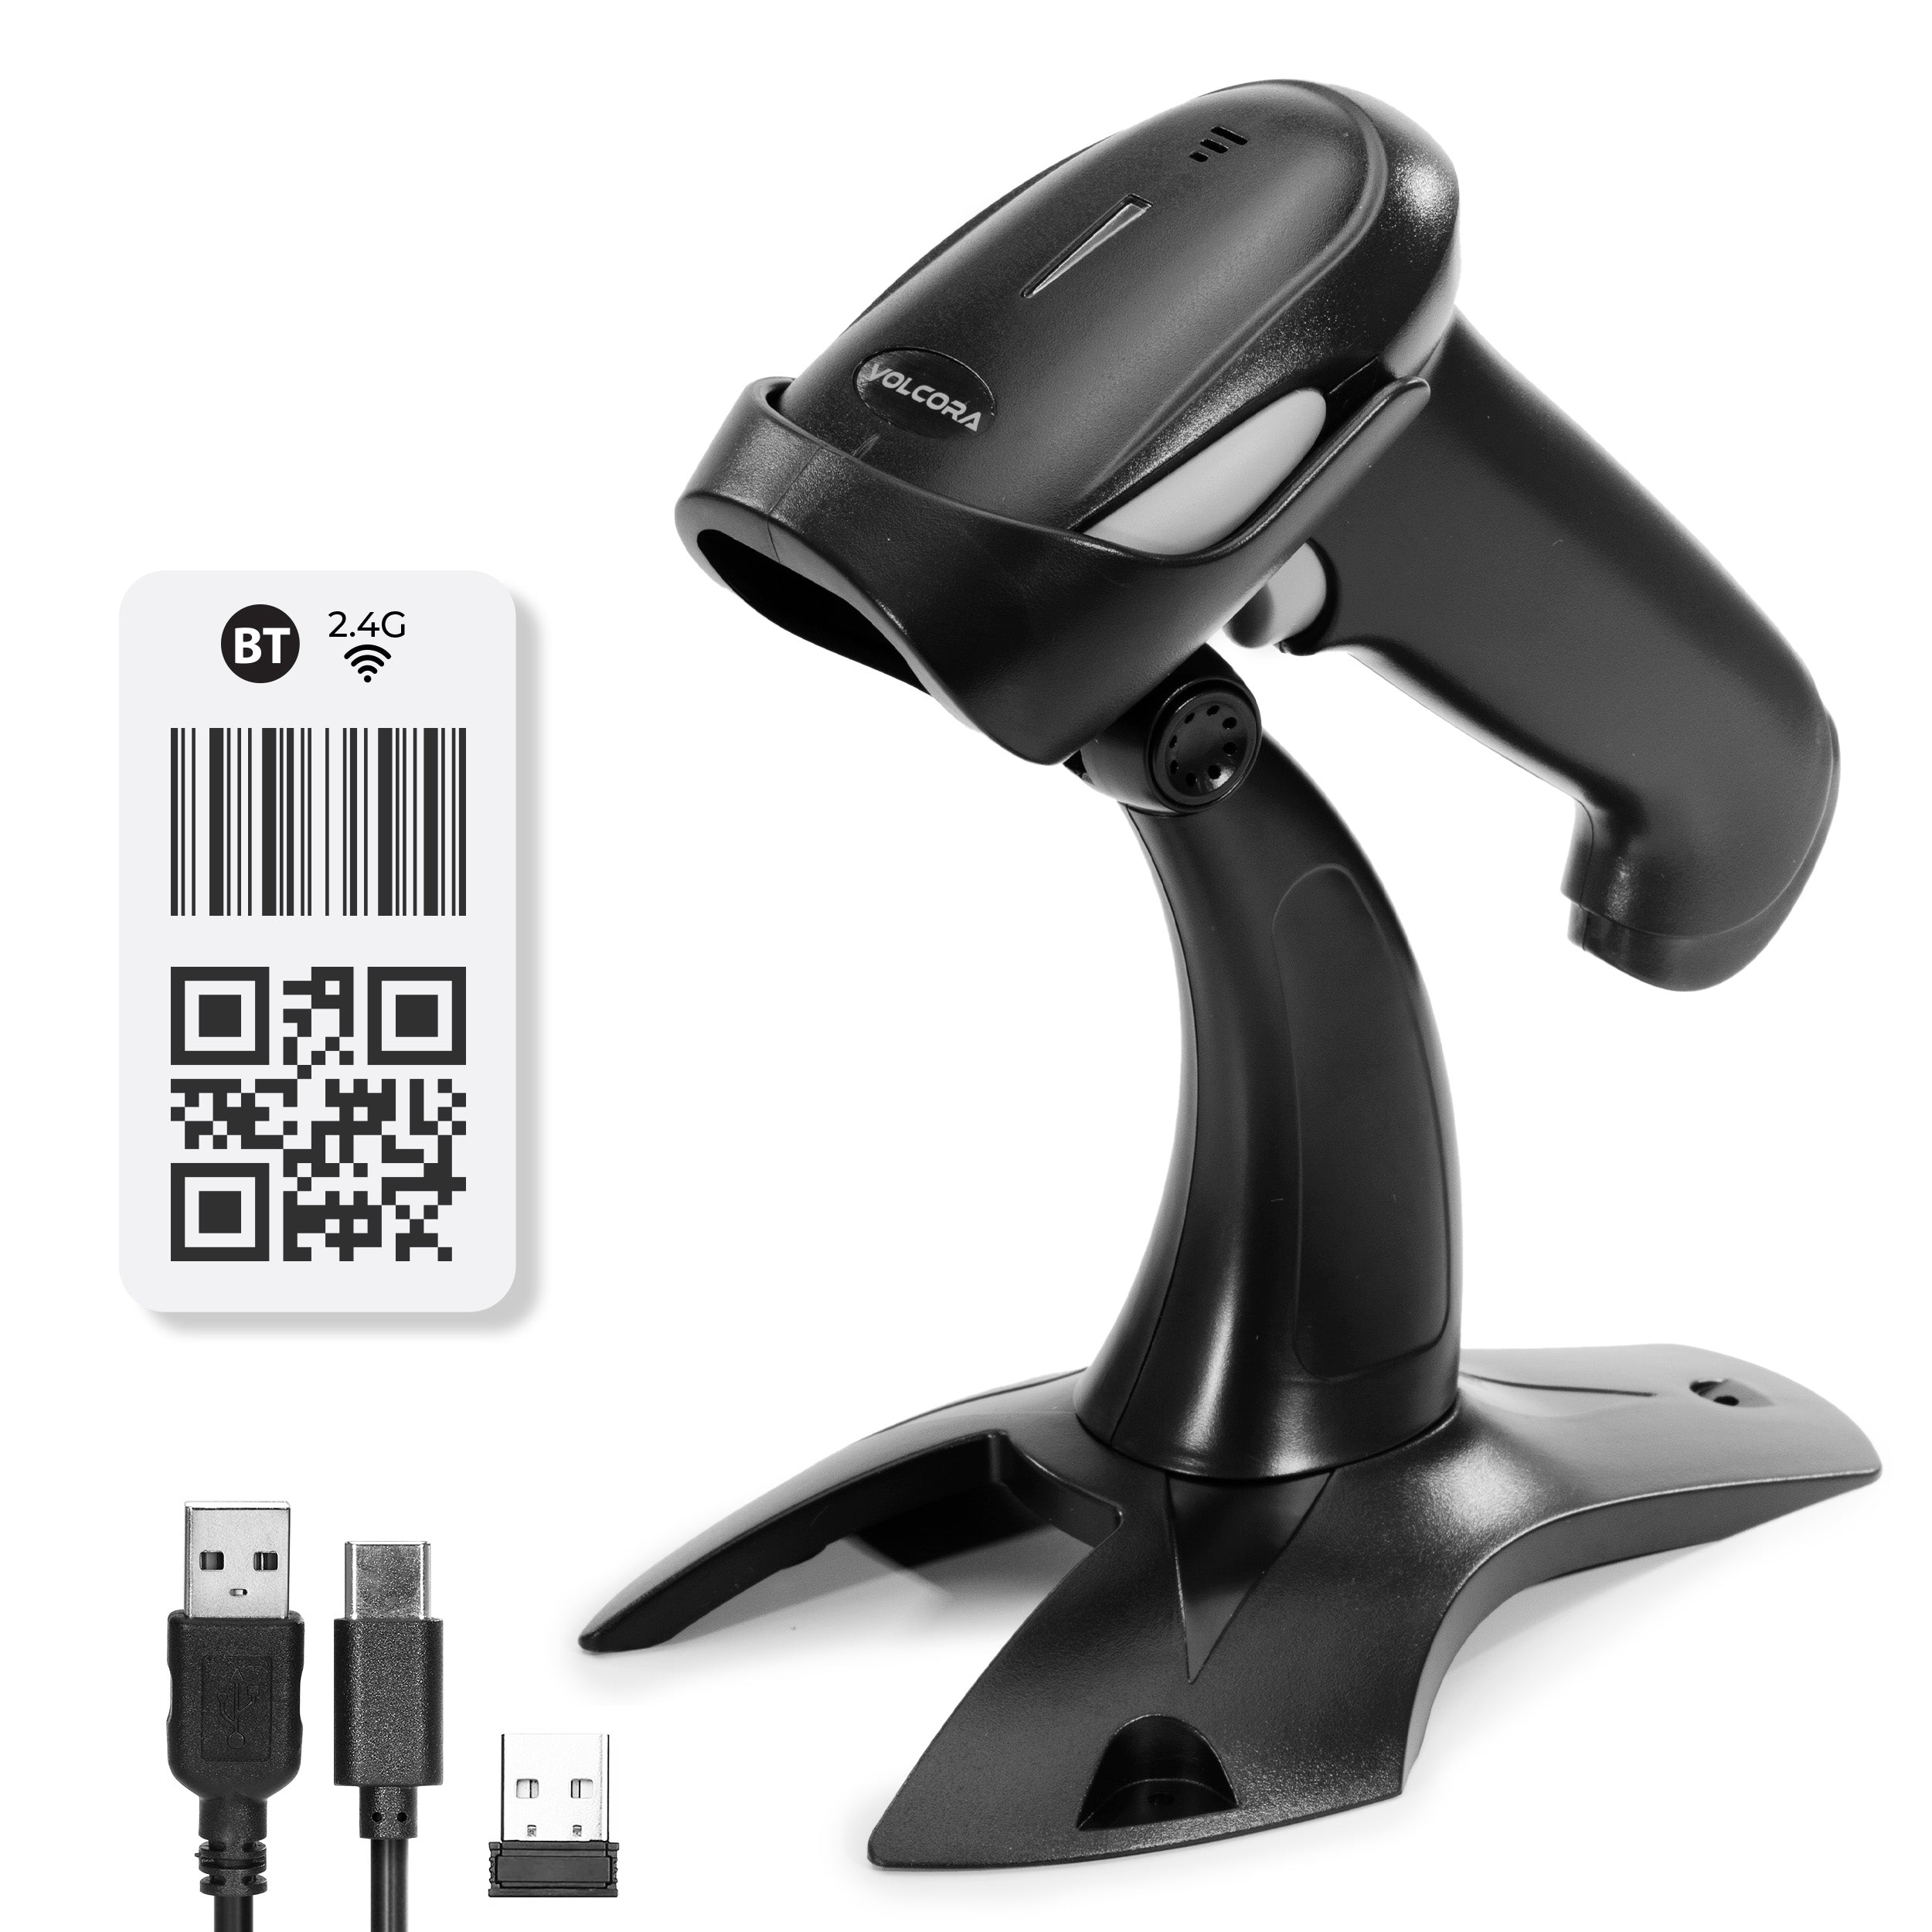 2D Wireless BT+2.4G Barcode Scanner with Stand - V-LHHBS-A1 – Volcora